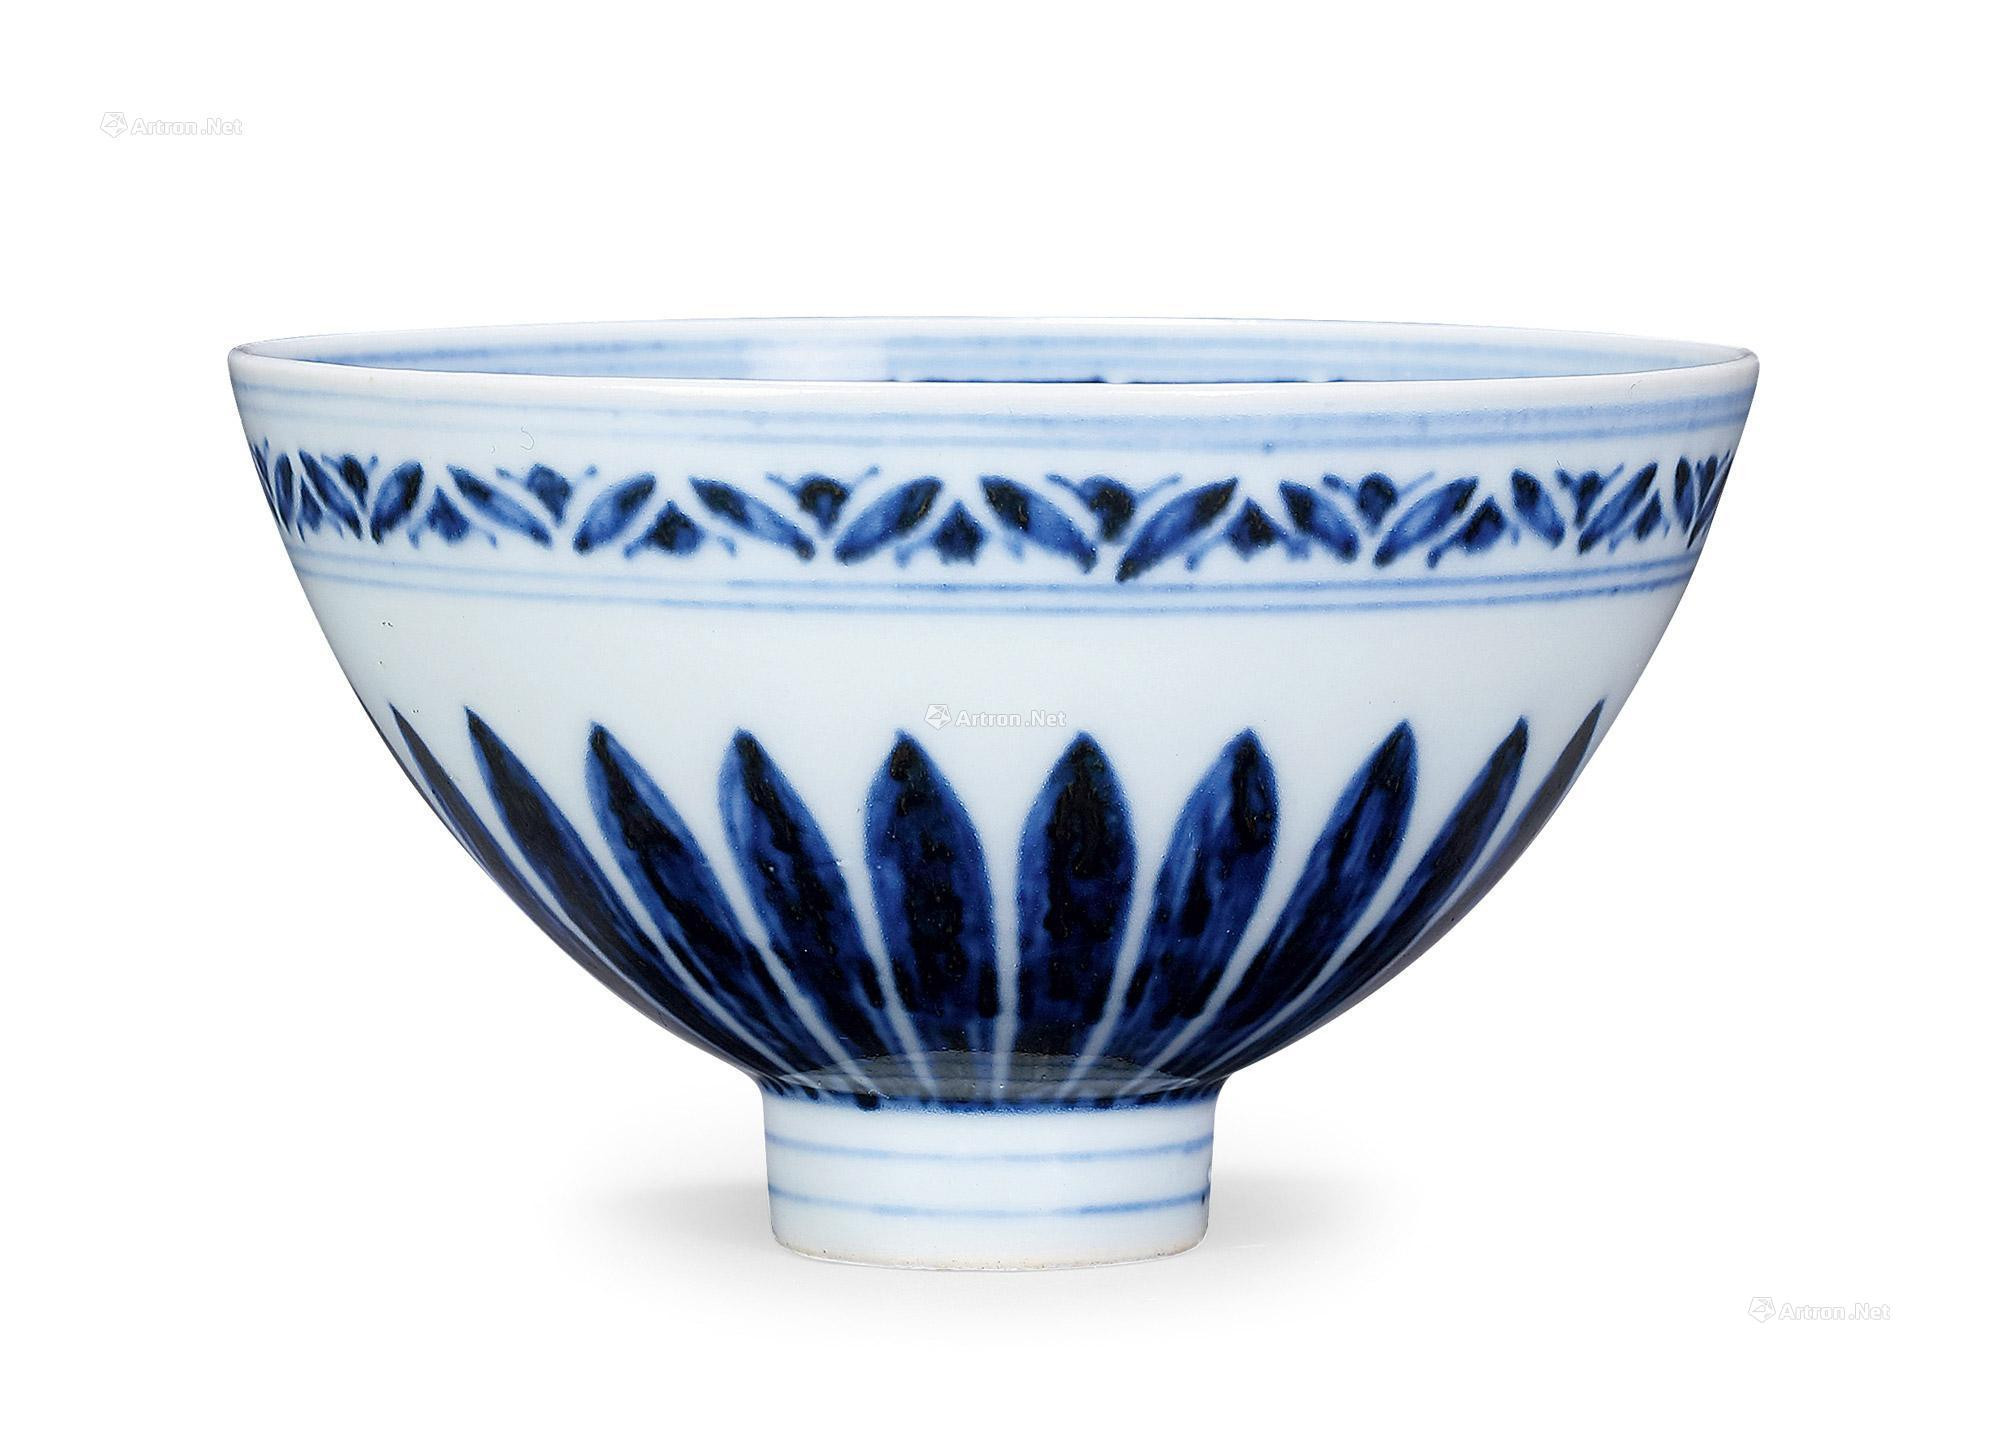 A RARE BLUE AND WHITE‘FLORAL’HEART-SHAPED BOWL